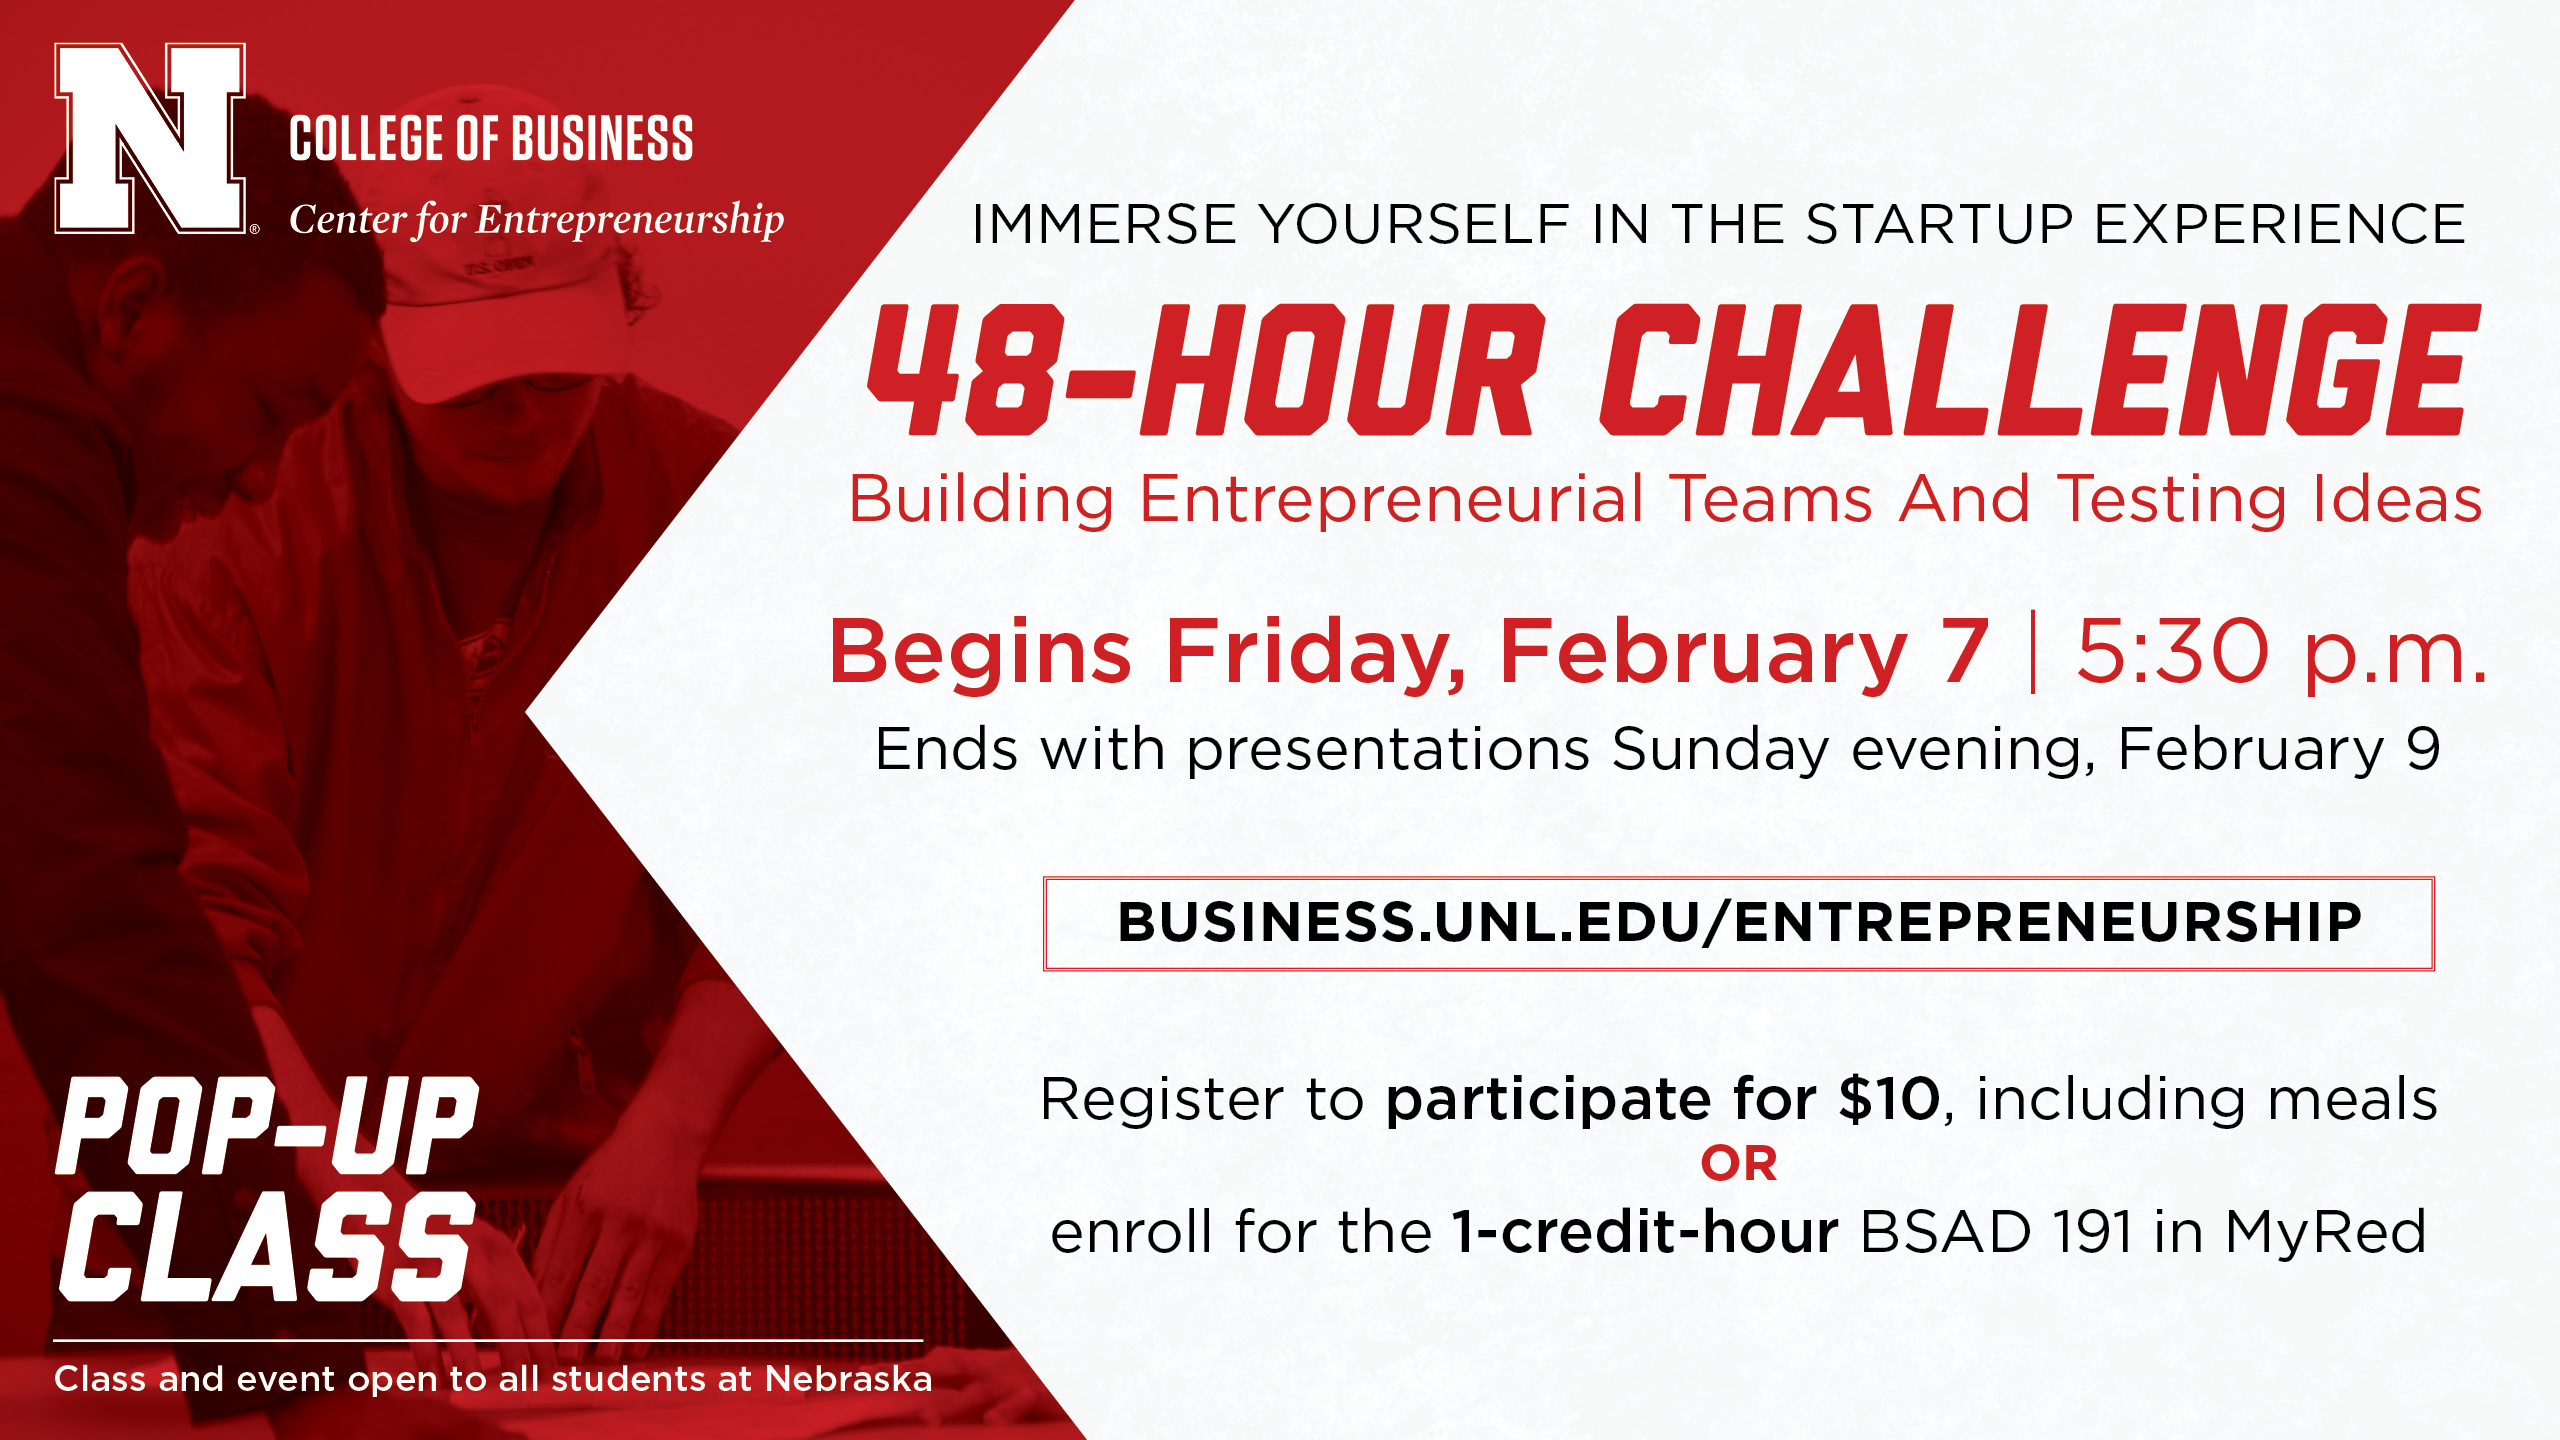 There are two ways to participate in the 48-Hour Challenge: as an event participant or as a student in a 1-credit-hour course.